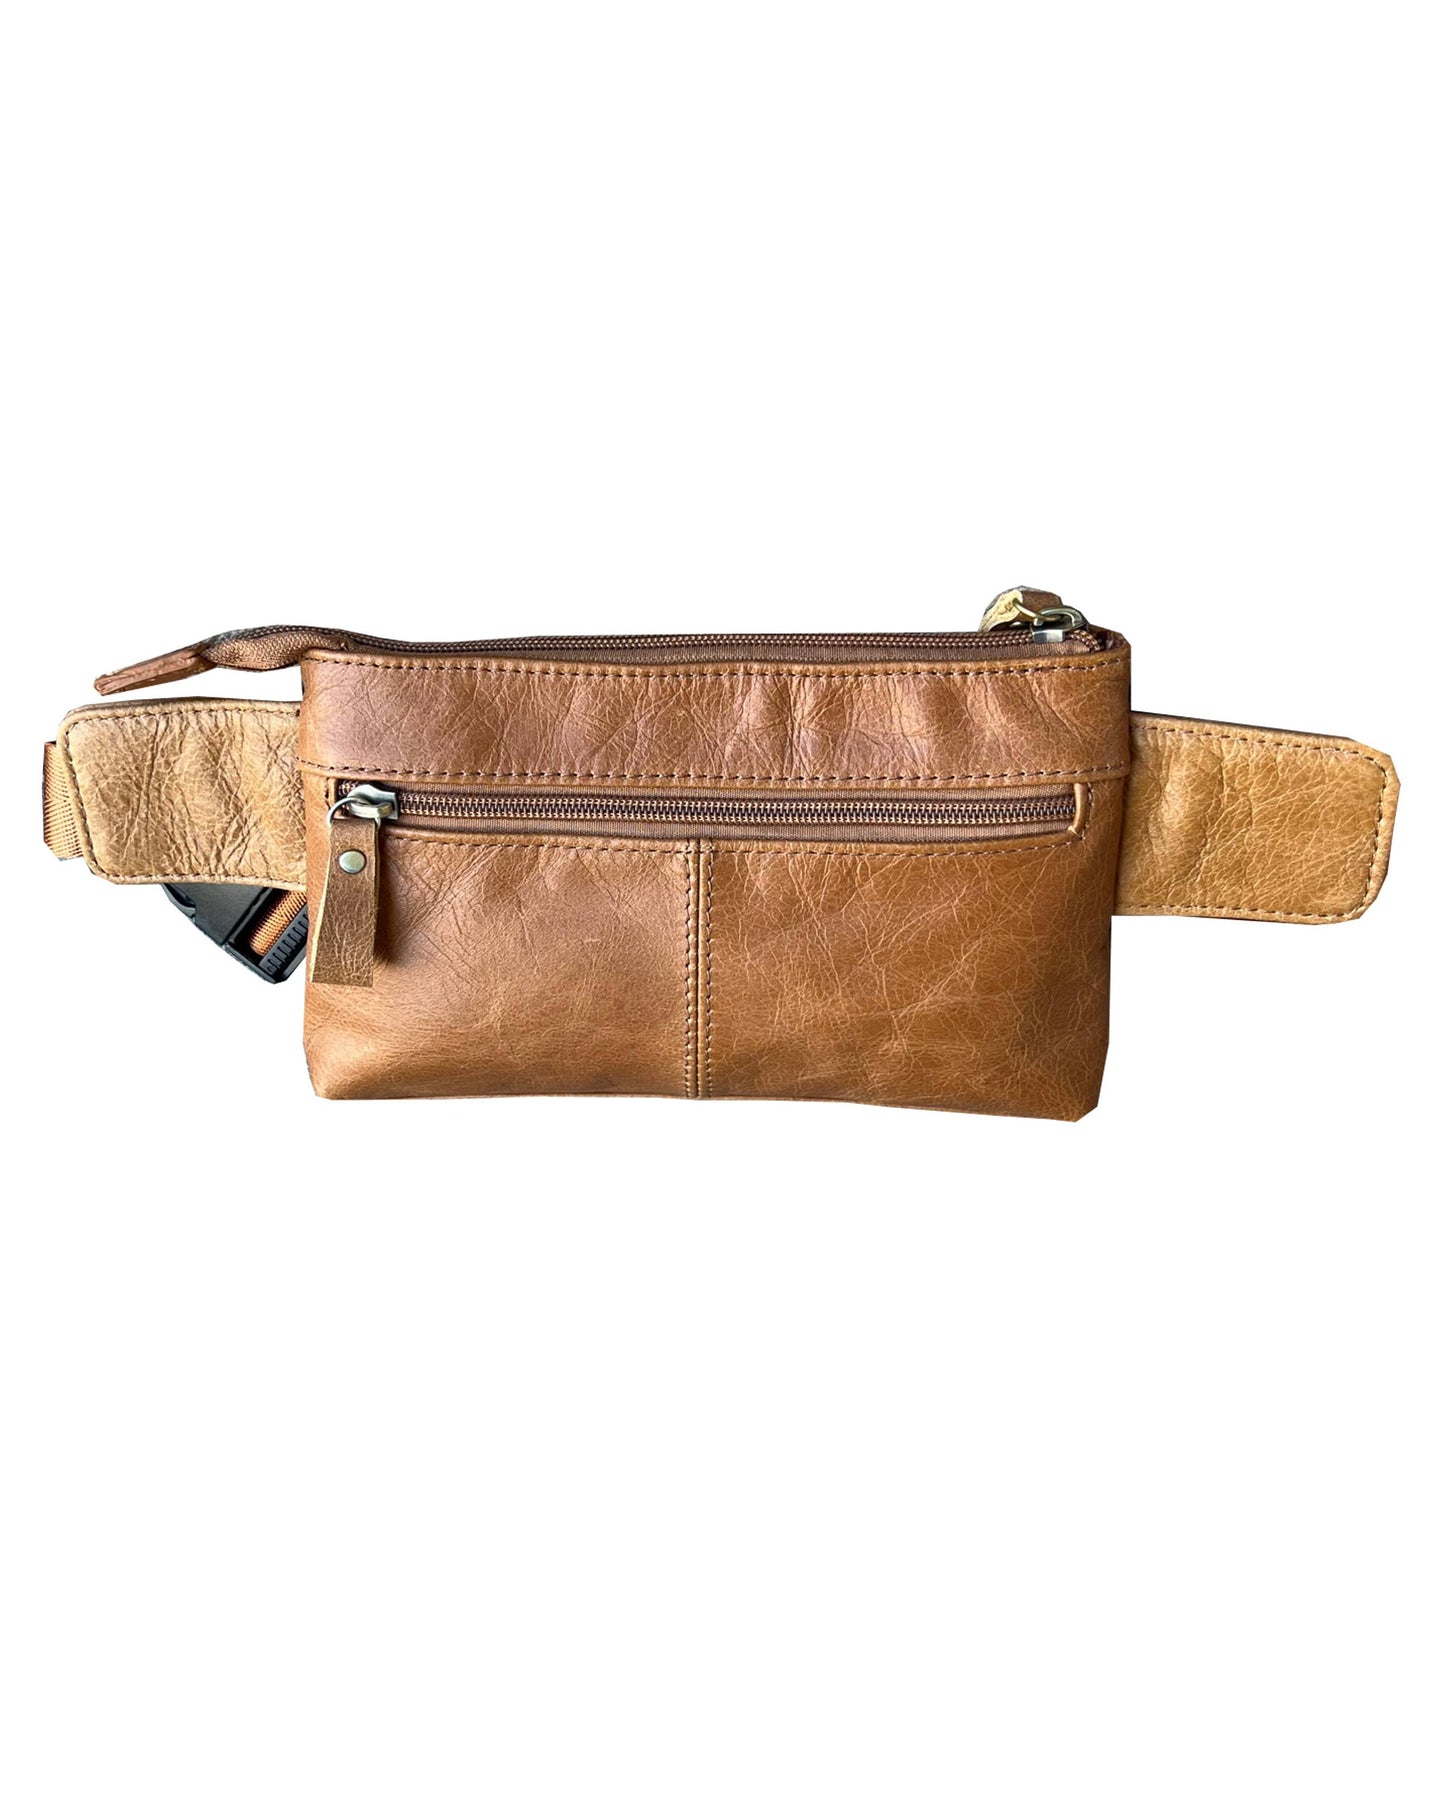 Leather Waist Bag / Fanny Pack